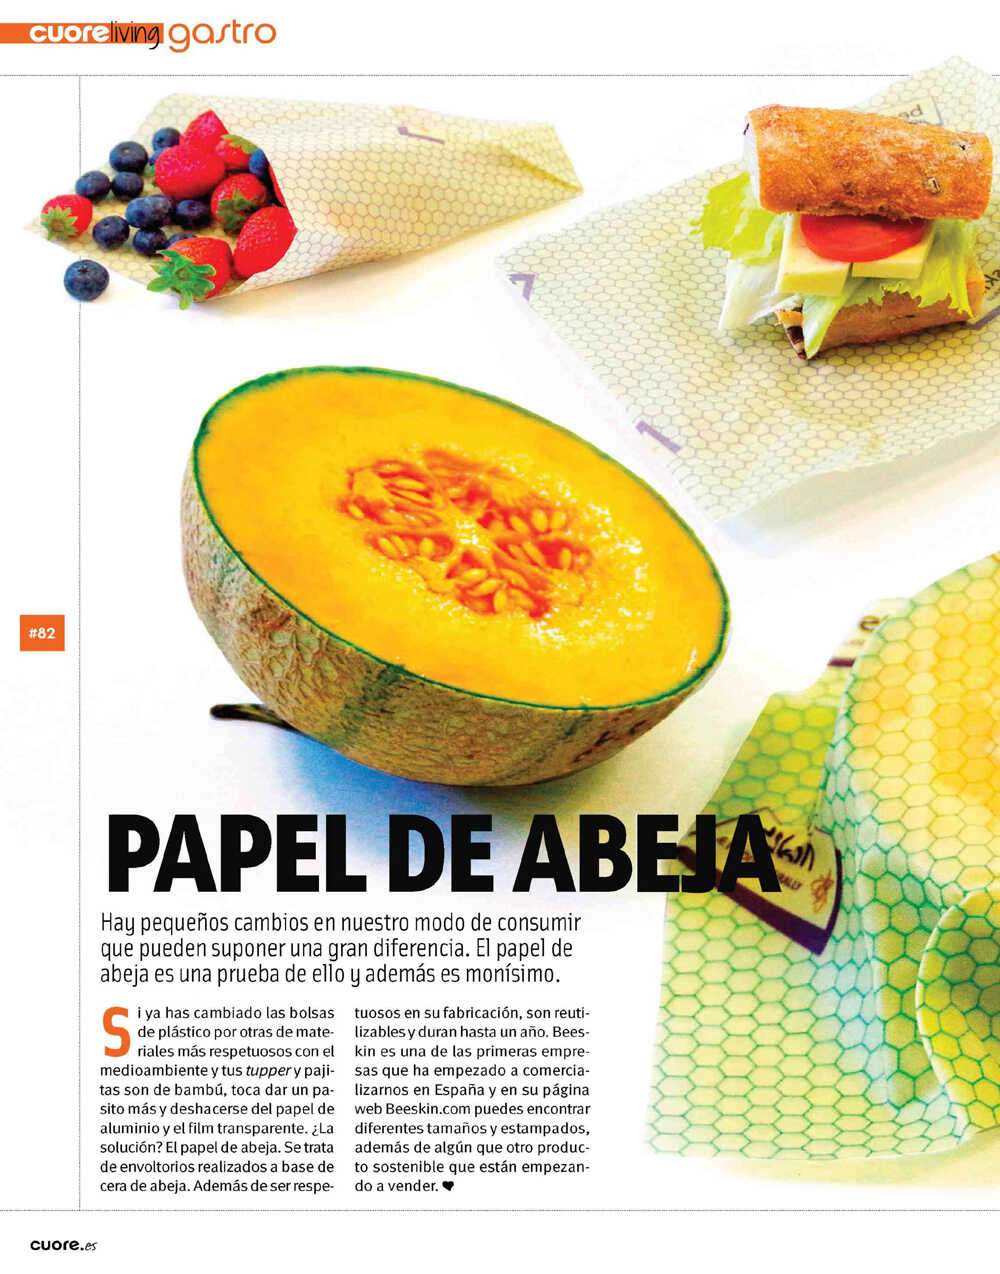 Cuore Gastro article showing a melon wrapped in beeskin beeswax wrap green